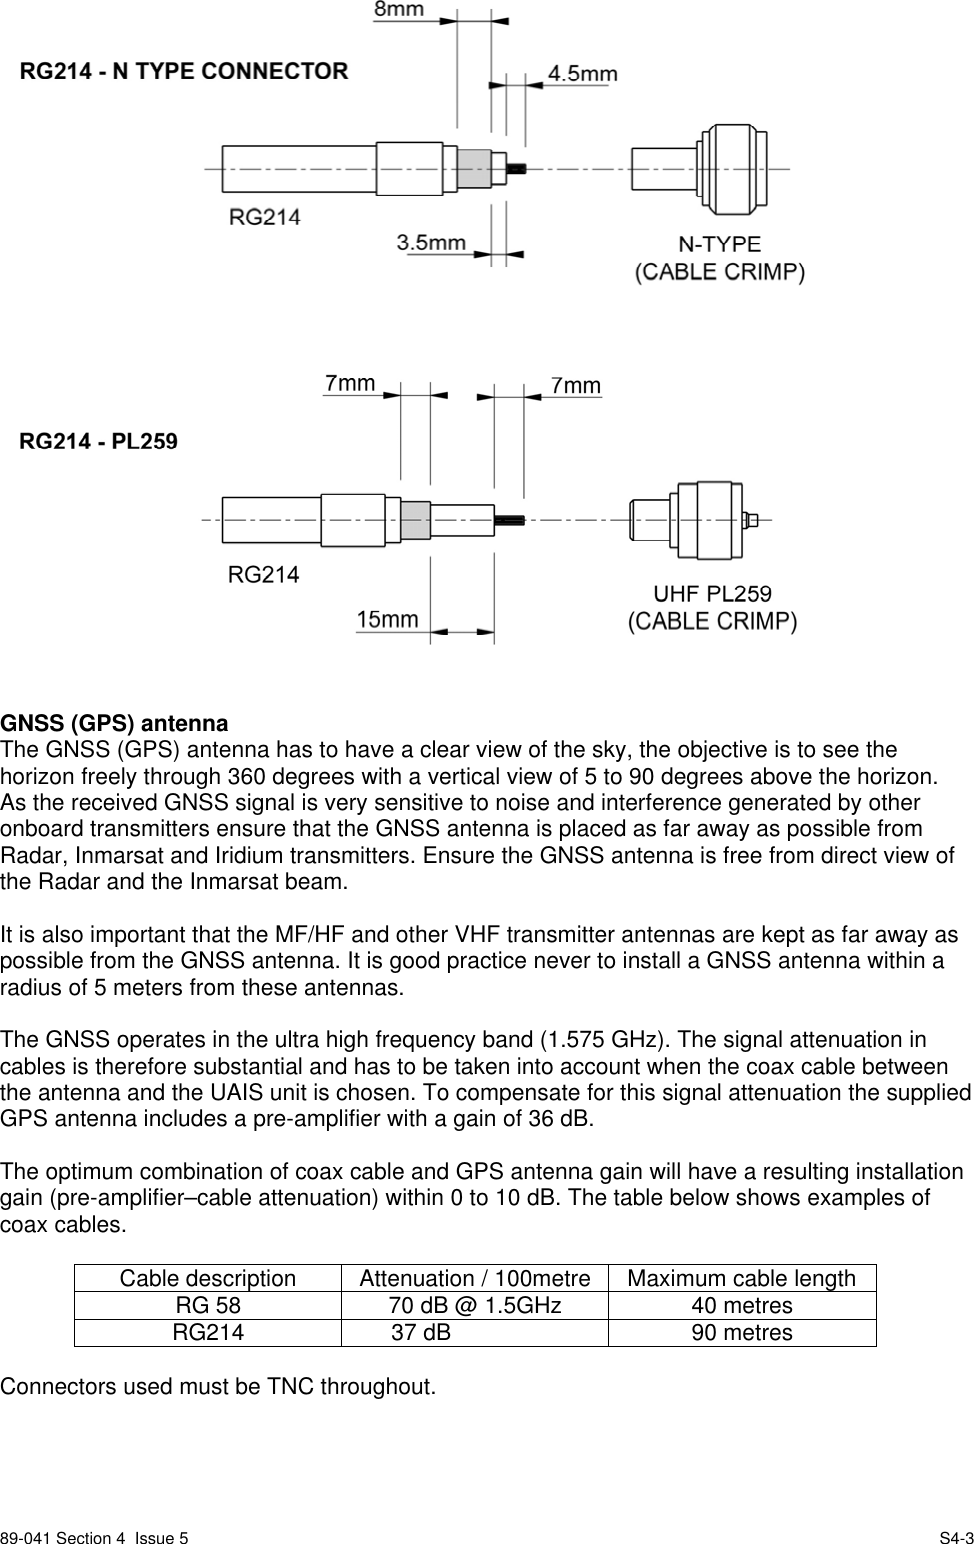 89-041 Section 4  Issue 5 S4-3GNSS (GPS) antennaThe GNSS (GPS) antenna has to have a clear view of the sky, the objective is to see thehorizon freely through 360 degrees with a vertical view of 5 to 90 degrees above the horizon.As the received GNSS signal is very sensitive to noise and interference generated by otheronboard transmitters ensure that the GNSS antenna is placed as far away as possible fromRadar, Inmarsat and Iridium transmitters. Ensure the GNSS antenna is free from direct view ofthe Radar and the Inmarsat beam.It is also important that the MF/HF and other VHF transmitter antennas are kept as far away aspossible from the GNSS antenna. It is good practice never to install a GNSS antenna within aradius of 5 meters from these antennas.The GNSS operates in the ultra high frequency band (1.575 GHz). The signal attenuation incables is therefore substantial and has to be taken into account when the coax cable betweenthe antenna and the UAIS unit is chosen. To compensate for this signal attenuation the suppliedGPS antenna includes a pre-amplifier with a gain of 36 dB.The optimum combination of coax cable and GPS antenna gain will have a resulting installationgain (pre-amplifier–cable attenuation) within 0 to 10 dB. The table below shows examples ofcoax cables.Cable description Attenuation / 100metre Maximum cable lengthRG 58 70 dB @ 1.5GHz 40 metresRG214       37 dB 90 metresConnectors used must be TNC throughout.